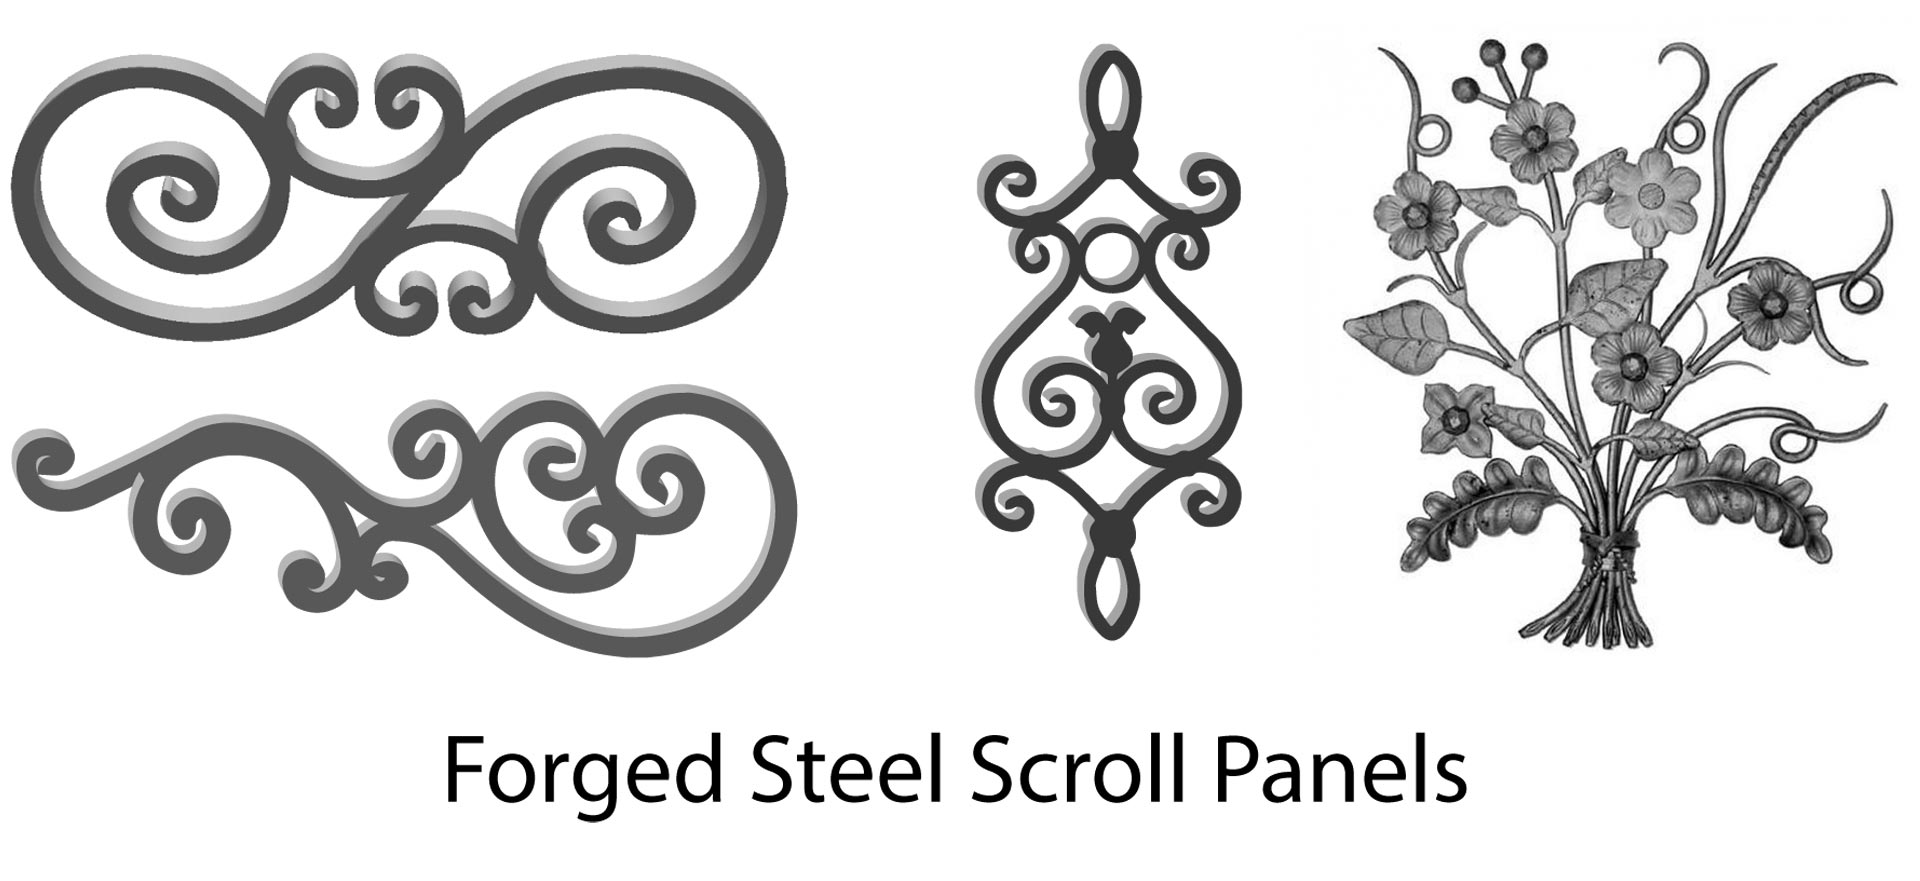 Wrought Iron Scrolls, Forged Steel Scroll Panels. Wide variety and Excellent Quality from Superior Ornamental Supply.